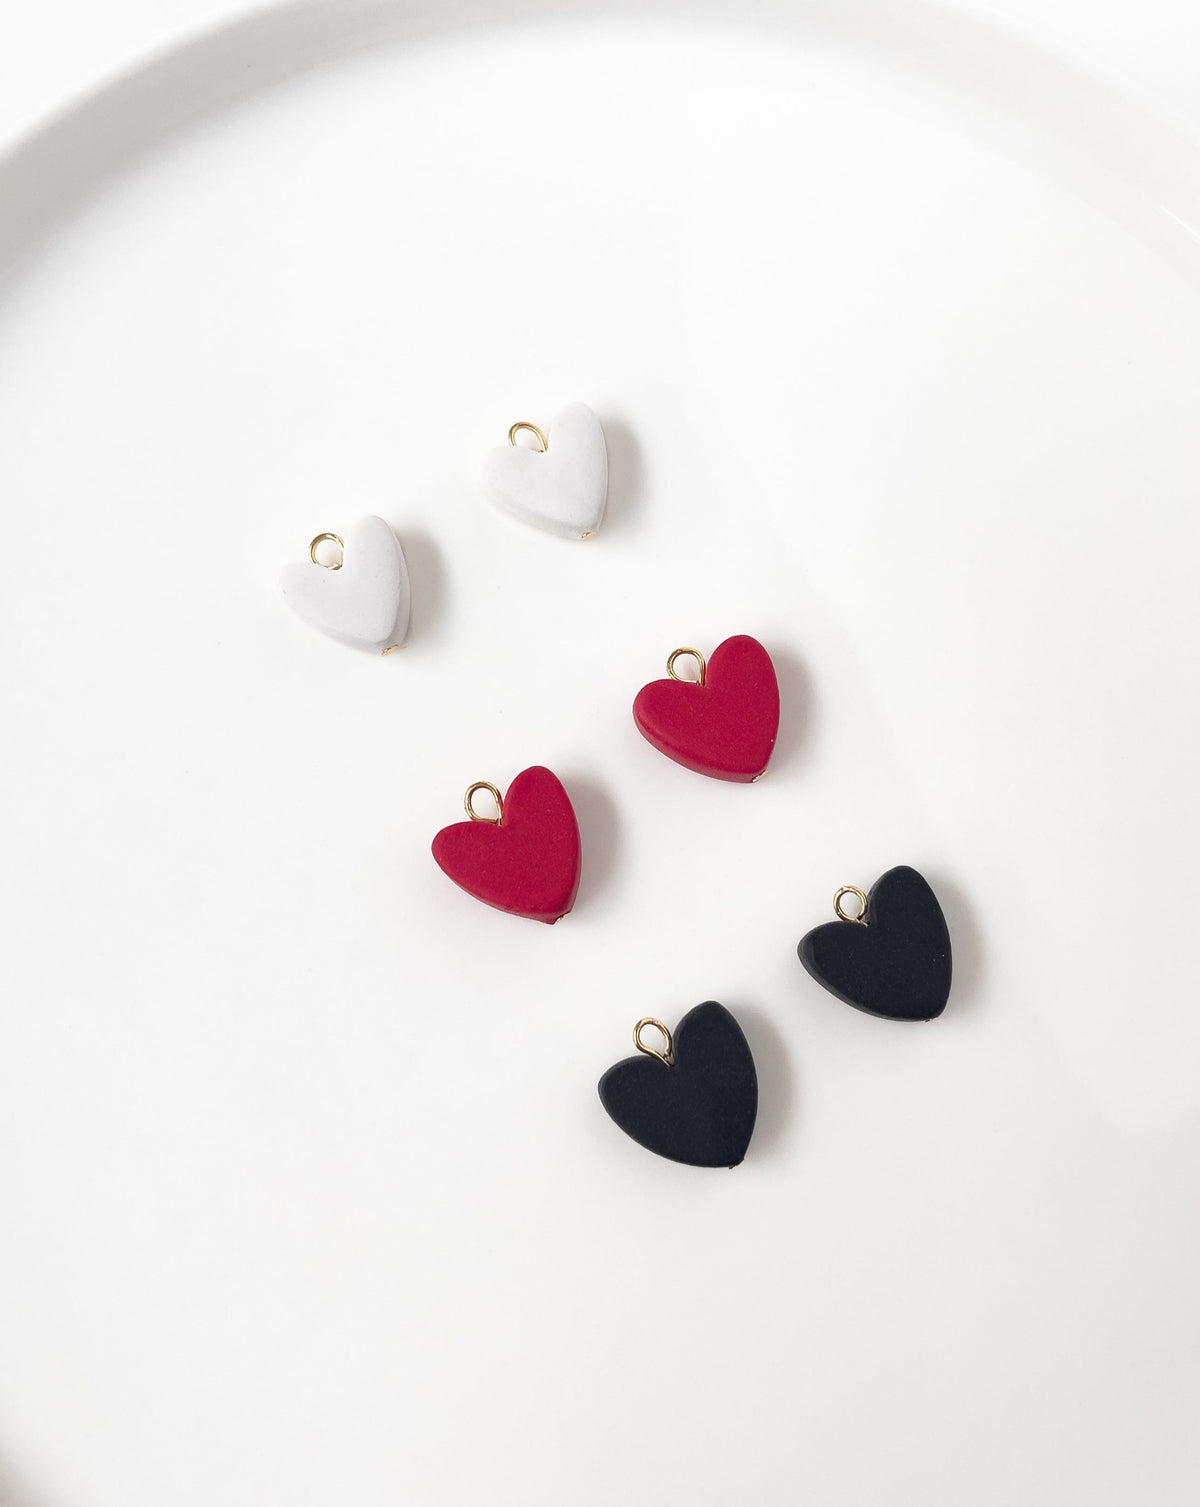 the collection of the heart charms in red,black and white colors.